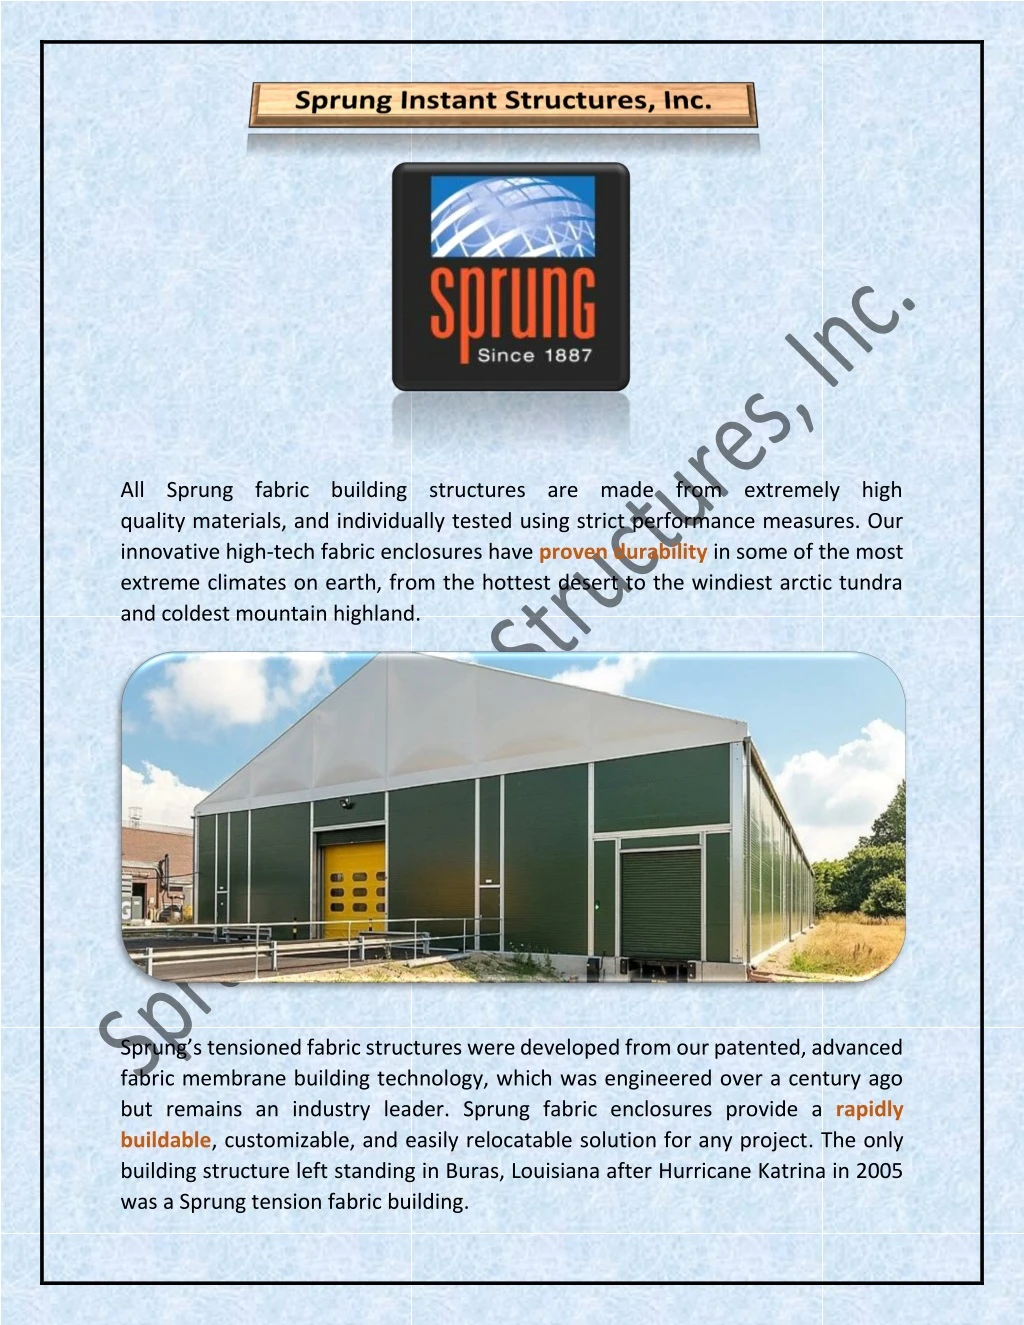 all sprung fabric building structures are made